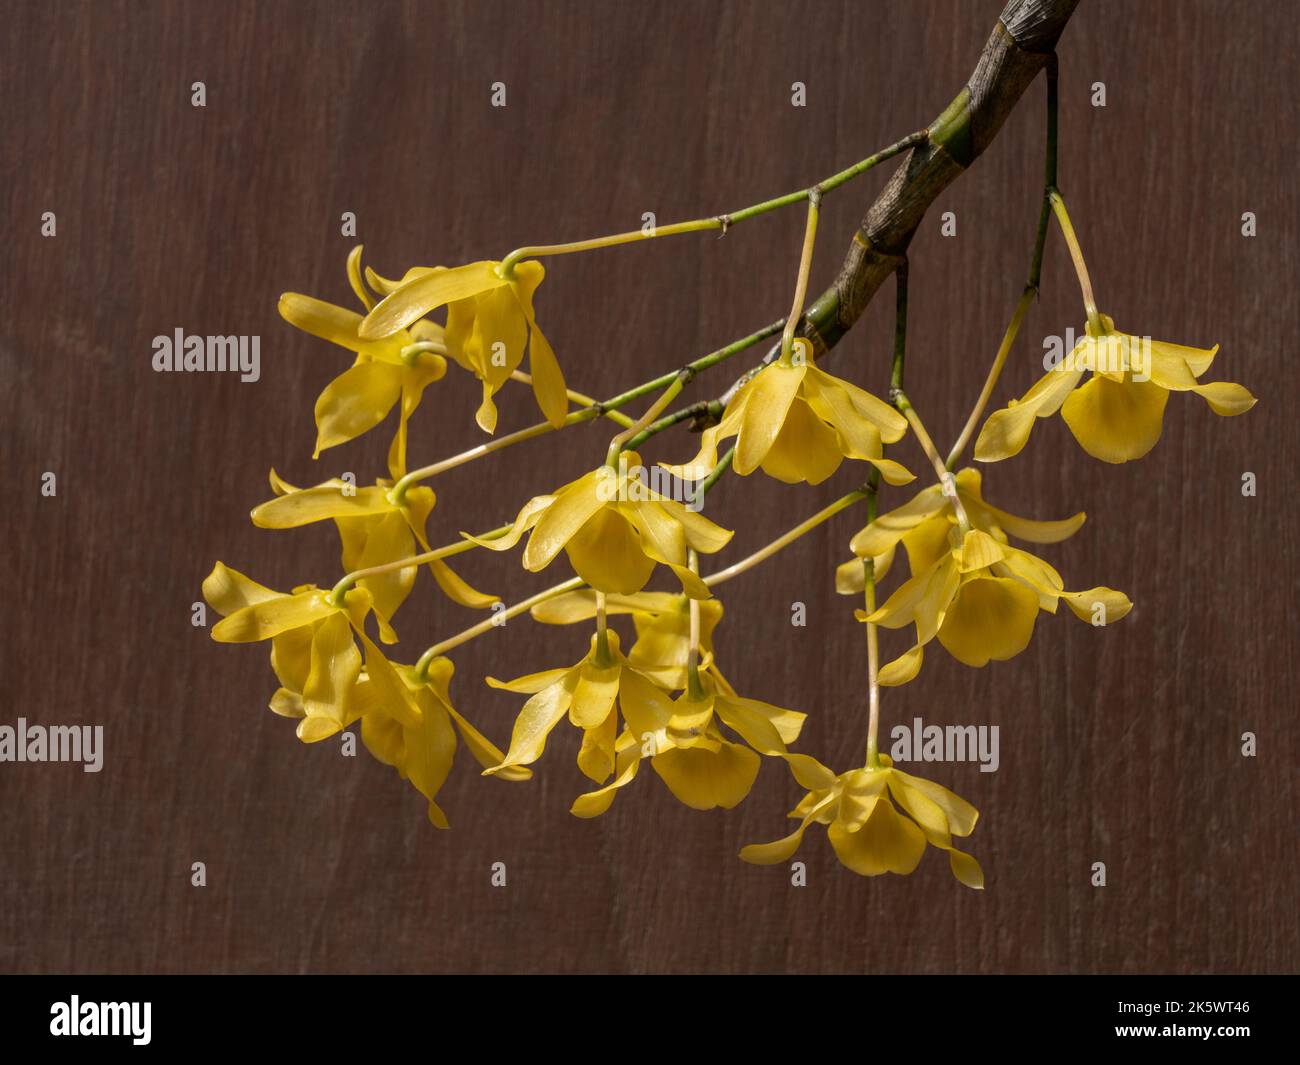 Closeup view of beautiful bright yellow flowers of dendrobium friedericksianum epiphytic orchid species isolated on dark wood background Stock Photo